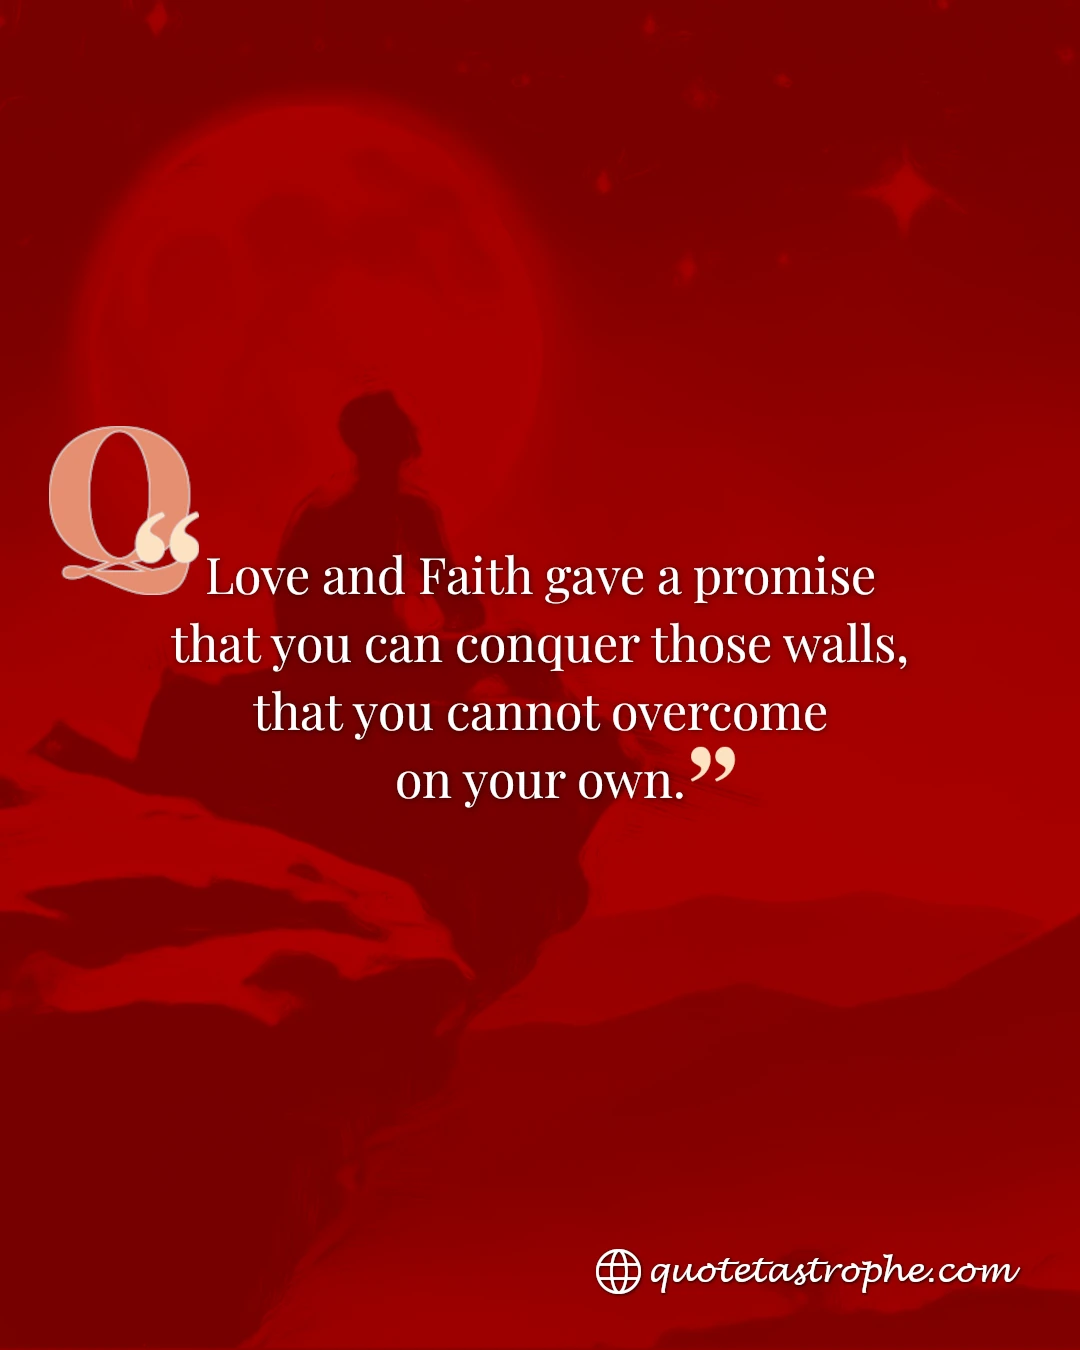 Love & Faith Gave a Promise That You Can Conquer Walls